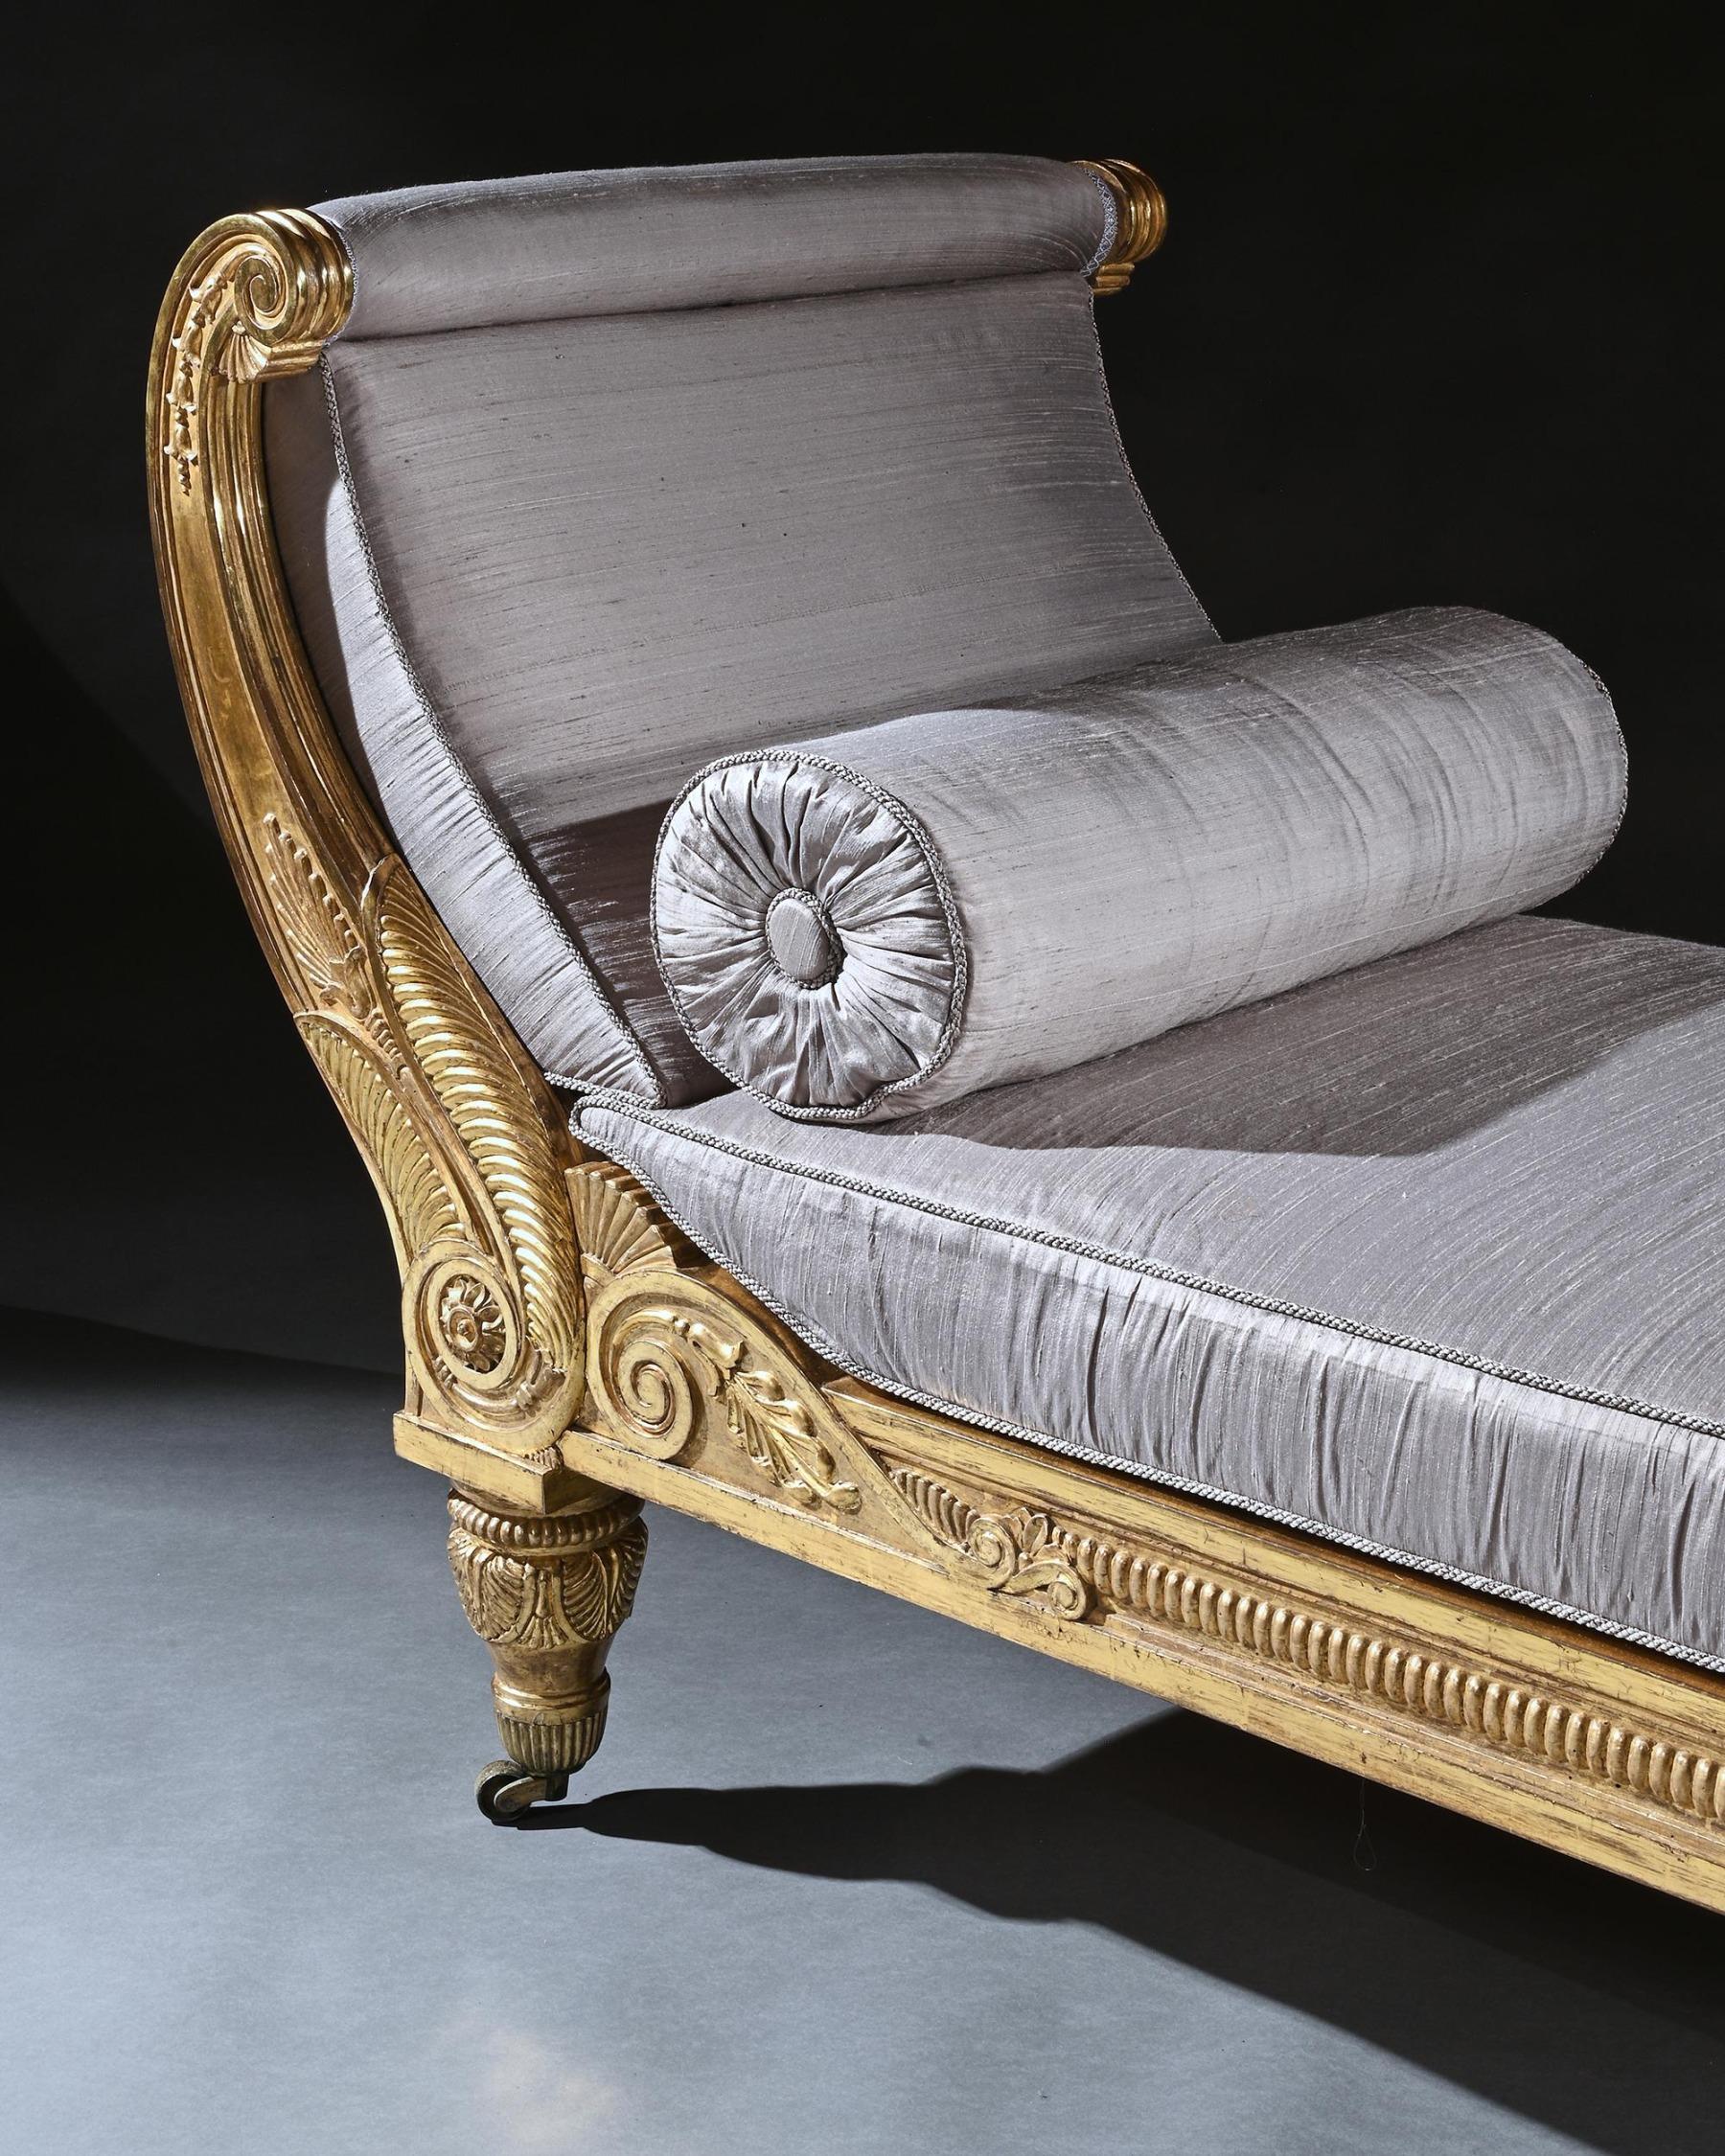 Morel and Hughes Regency Carved Giltwood Daybed Likely Made for Badminton House  1